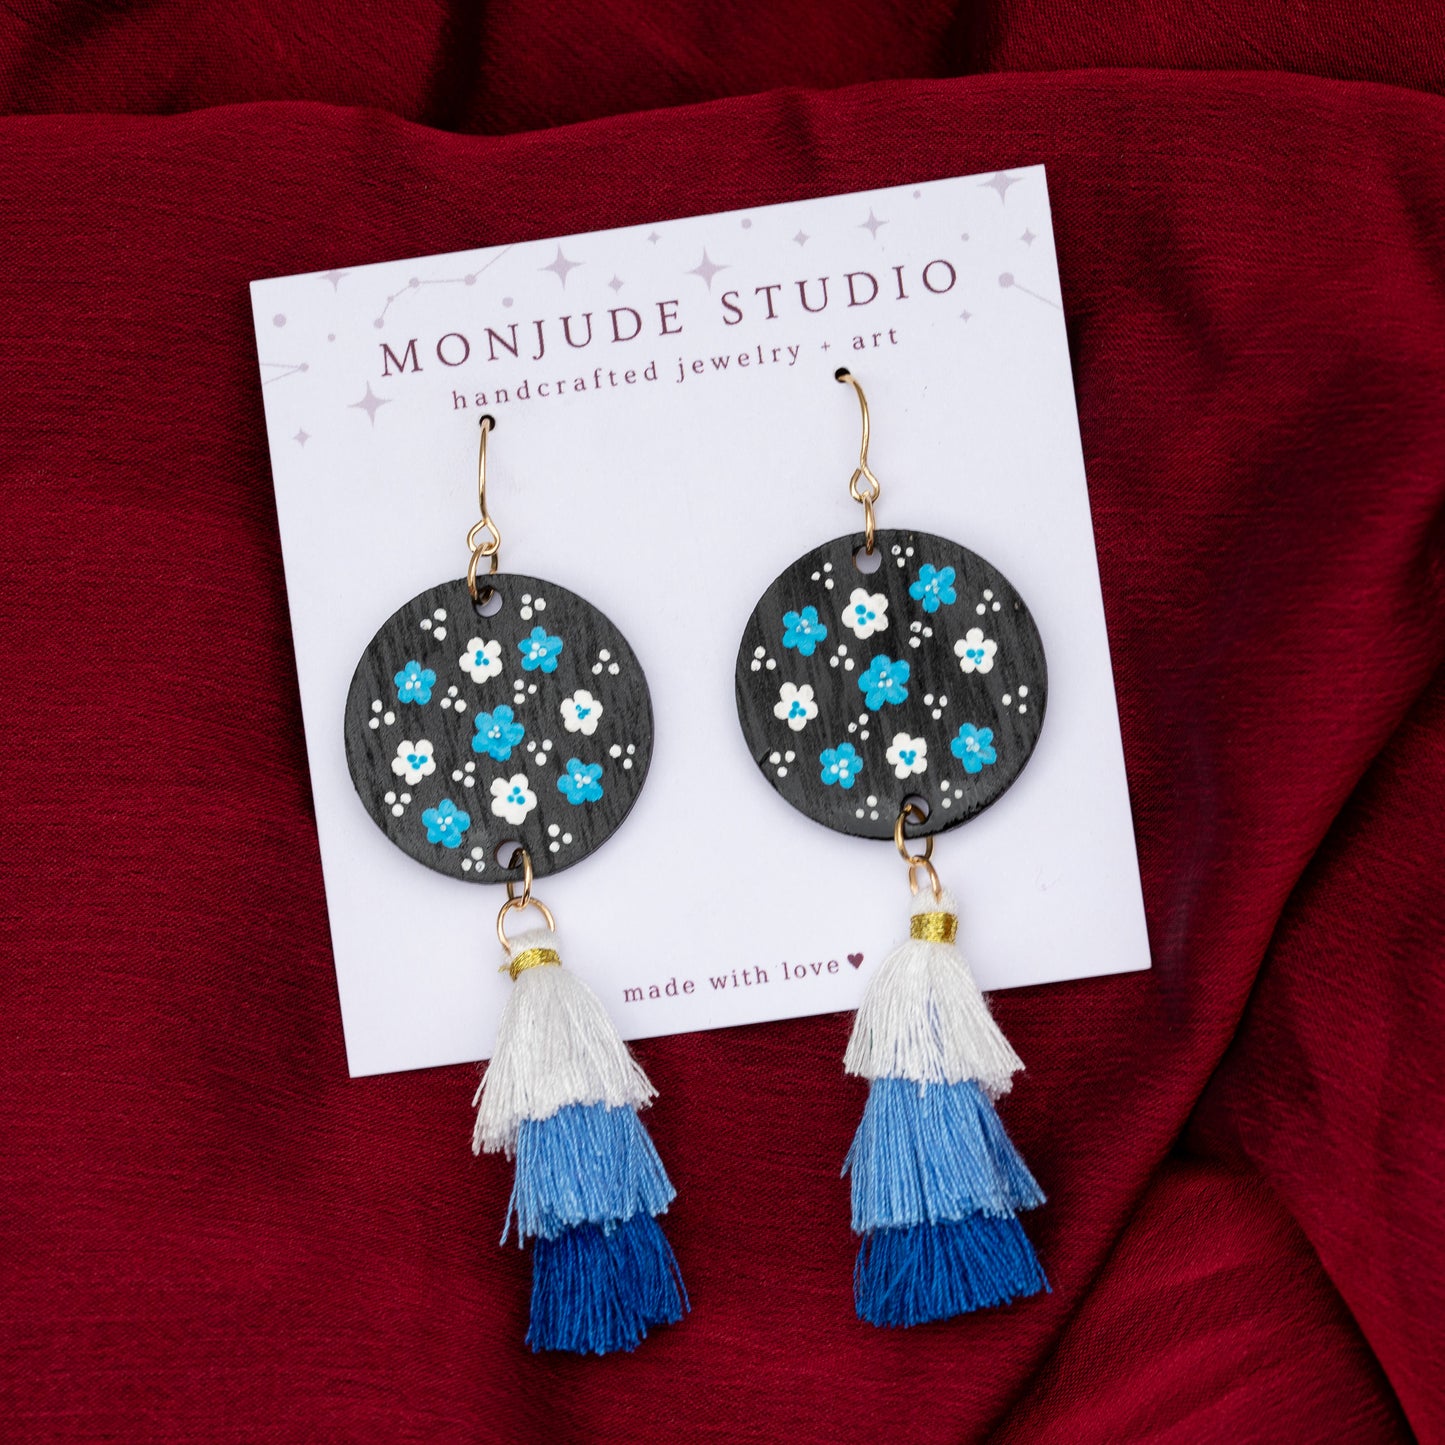 Wooden Painted Floral Earrings with Tassels